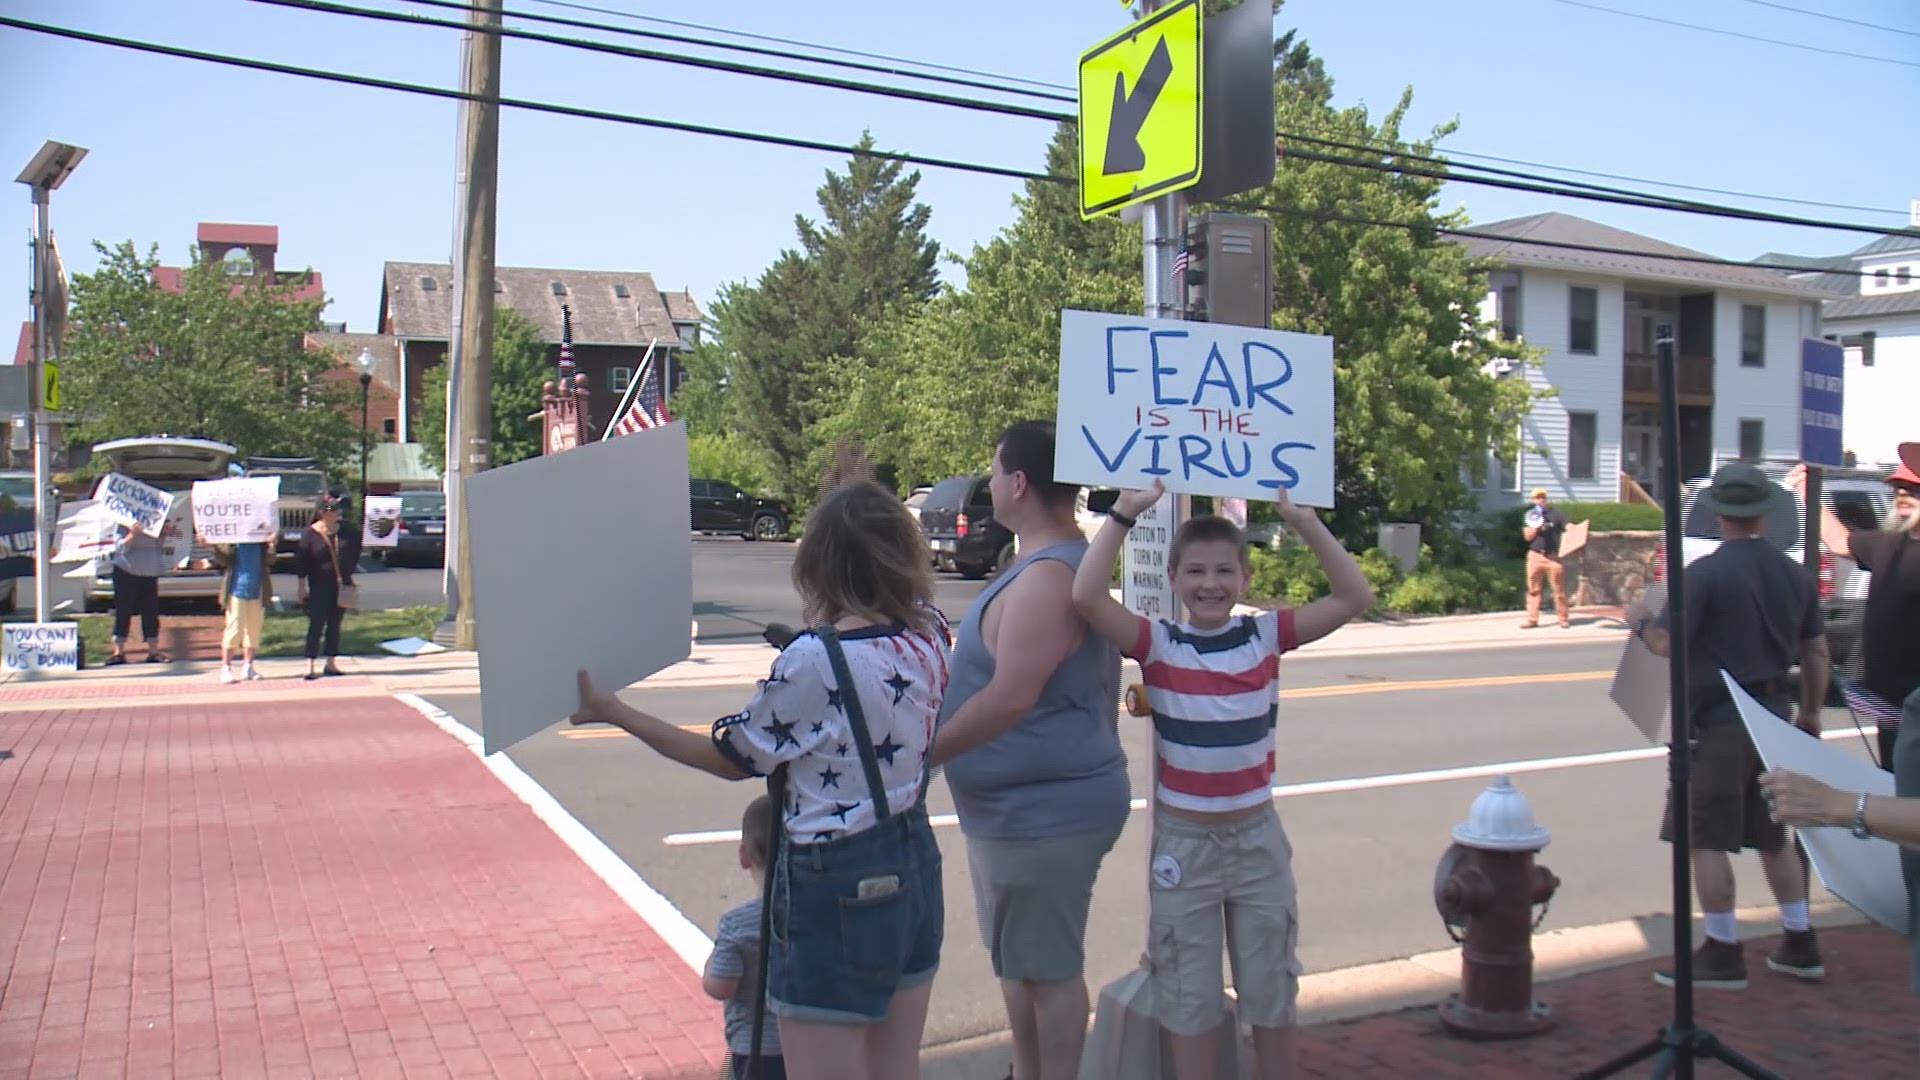 Protesters held signs outside the Loudoun County Government Center Friday